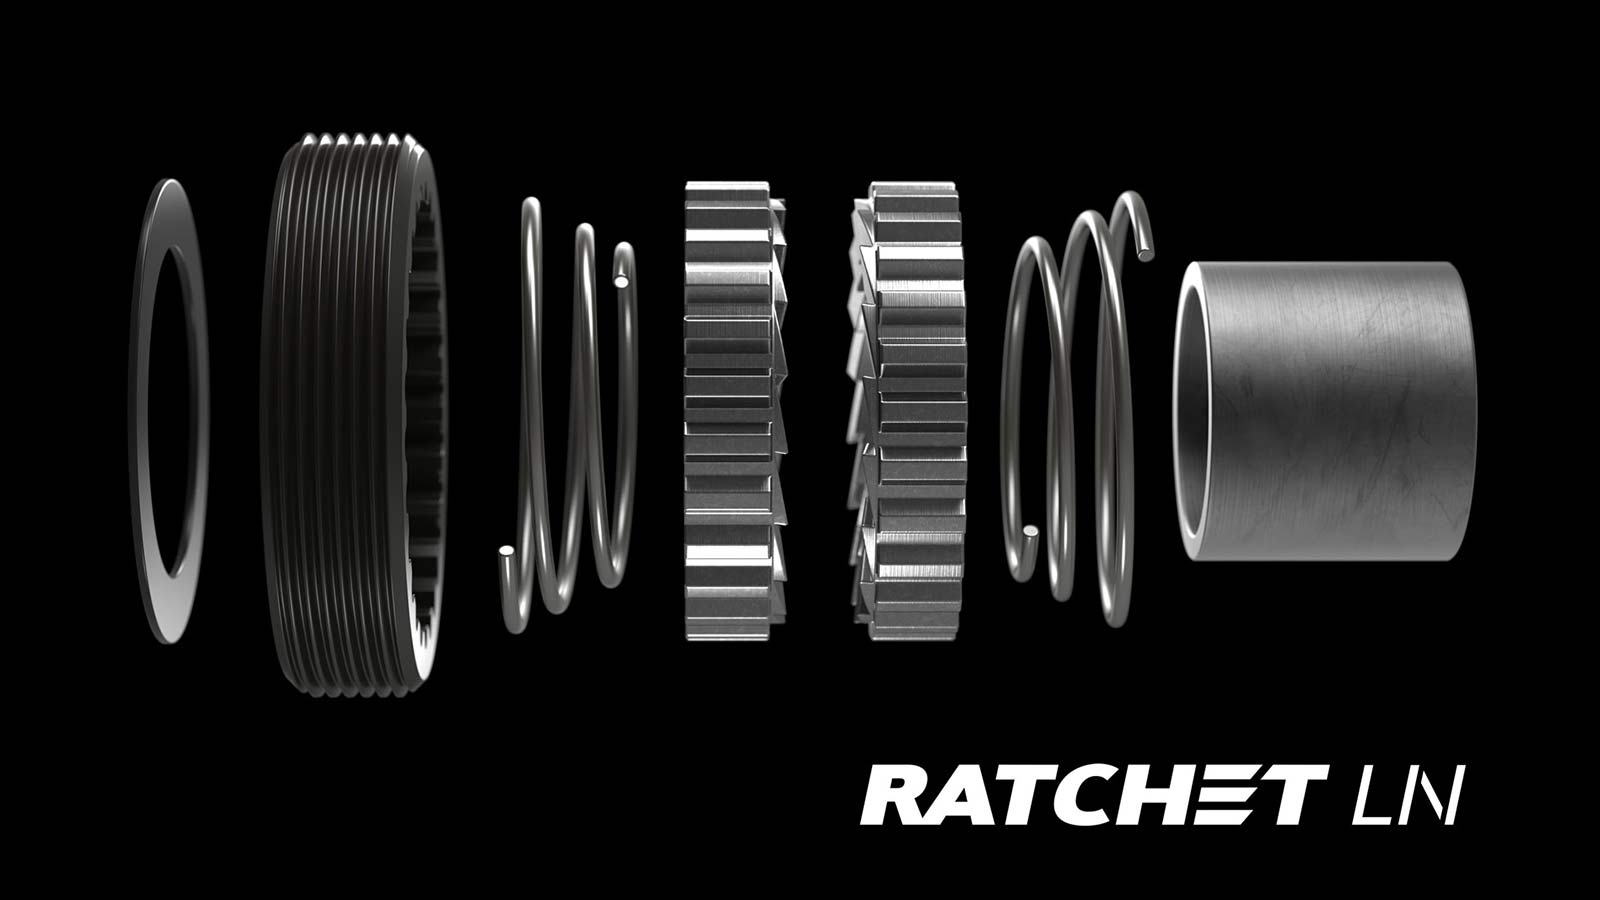 DT Swiss Ratchet LN hub upgrade kit, from 3-pawls to Star Ratchet, components